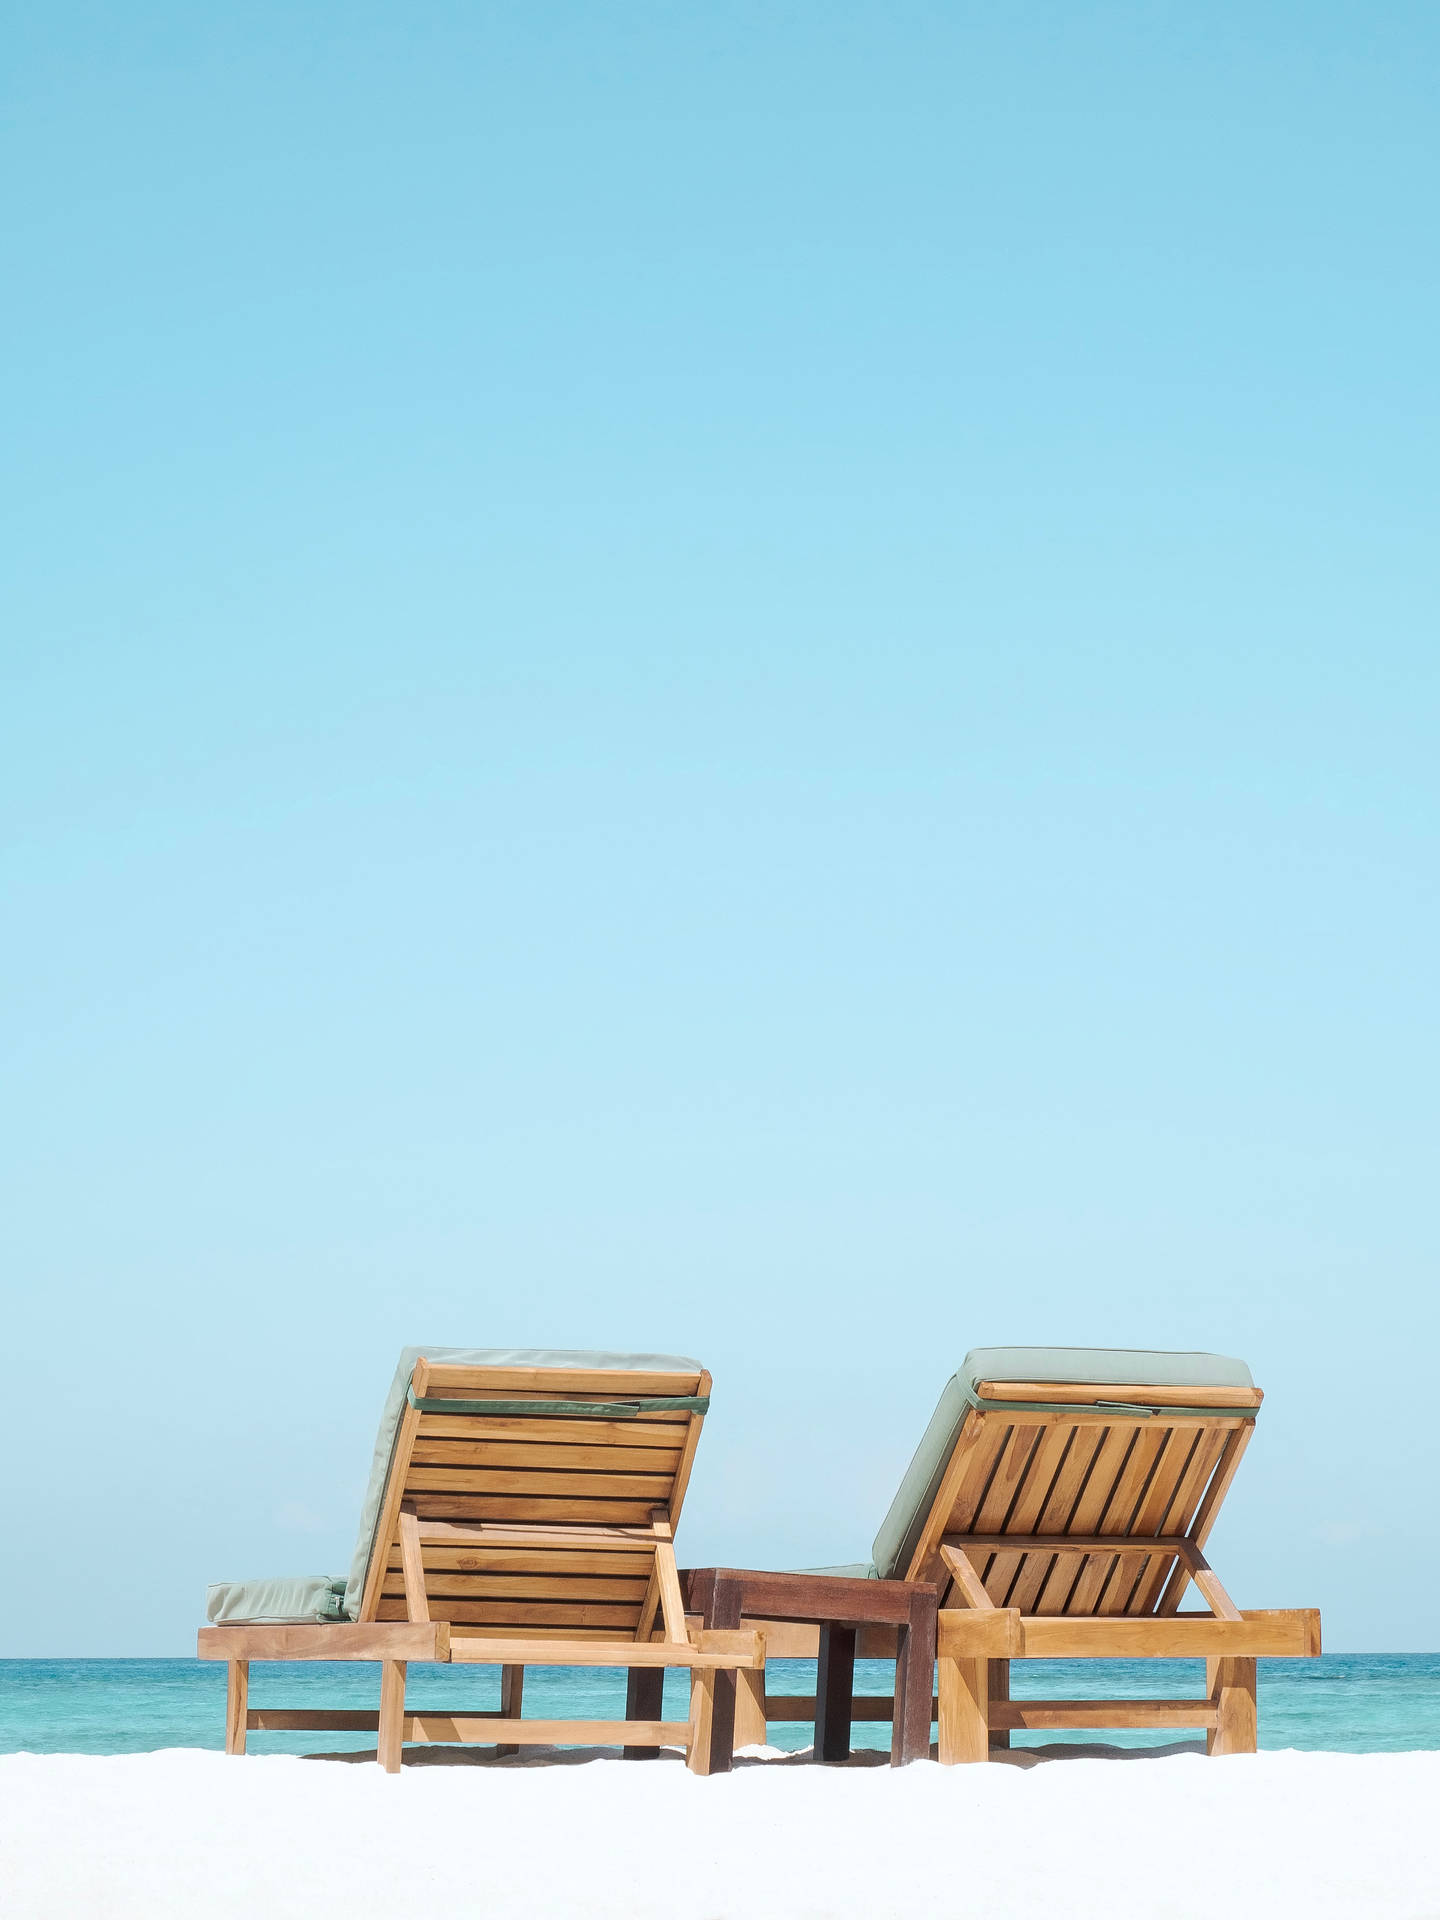 Tranquil Beach Loungers Awaiting Visitors Background